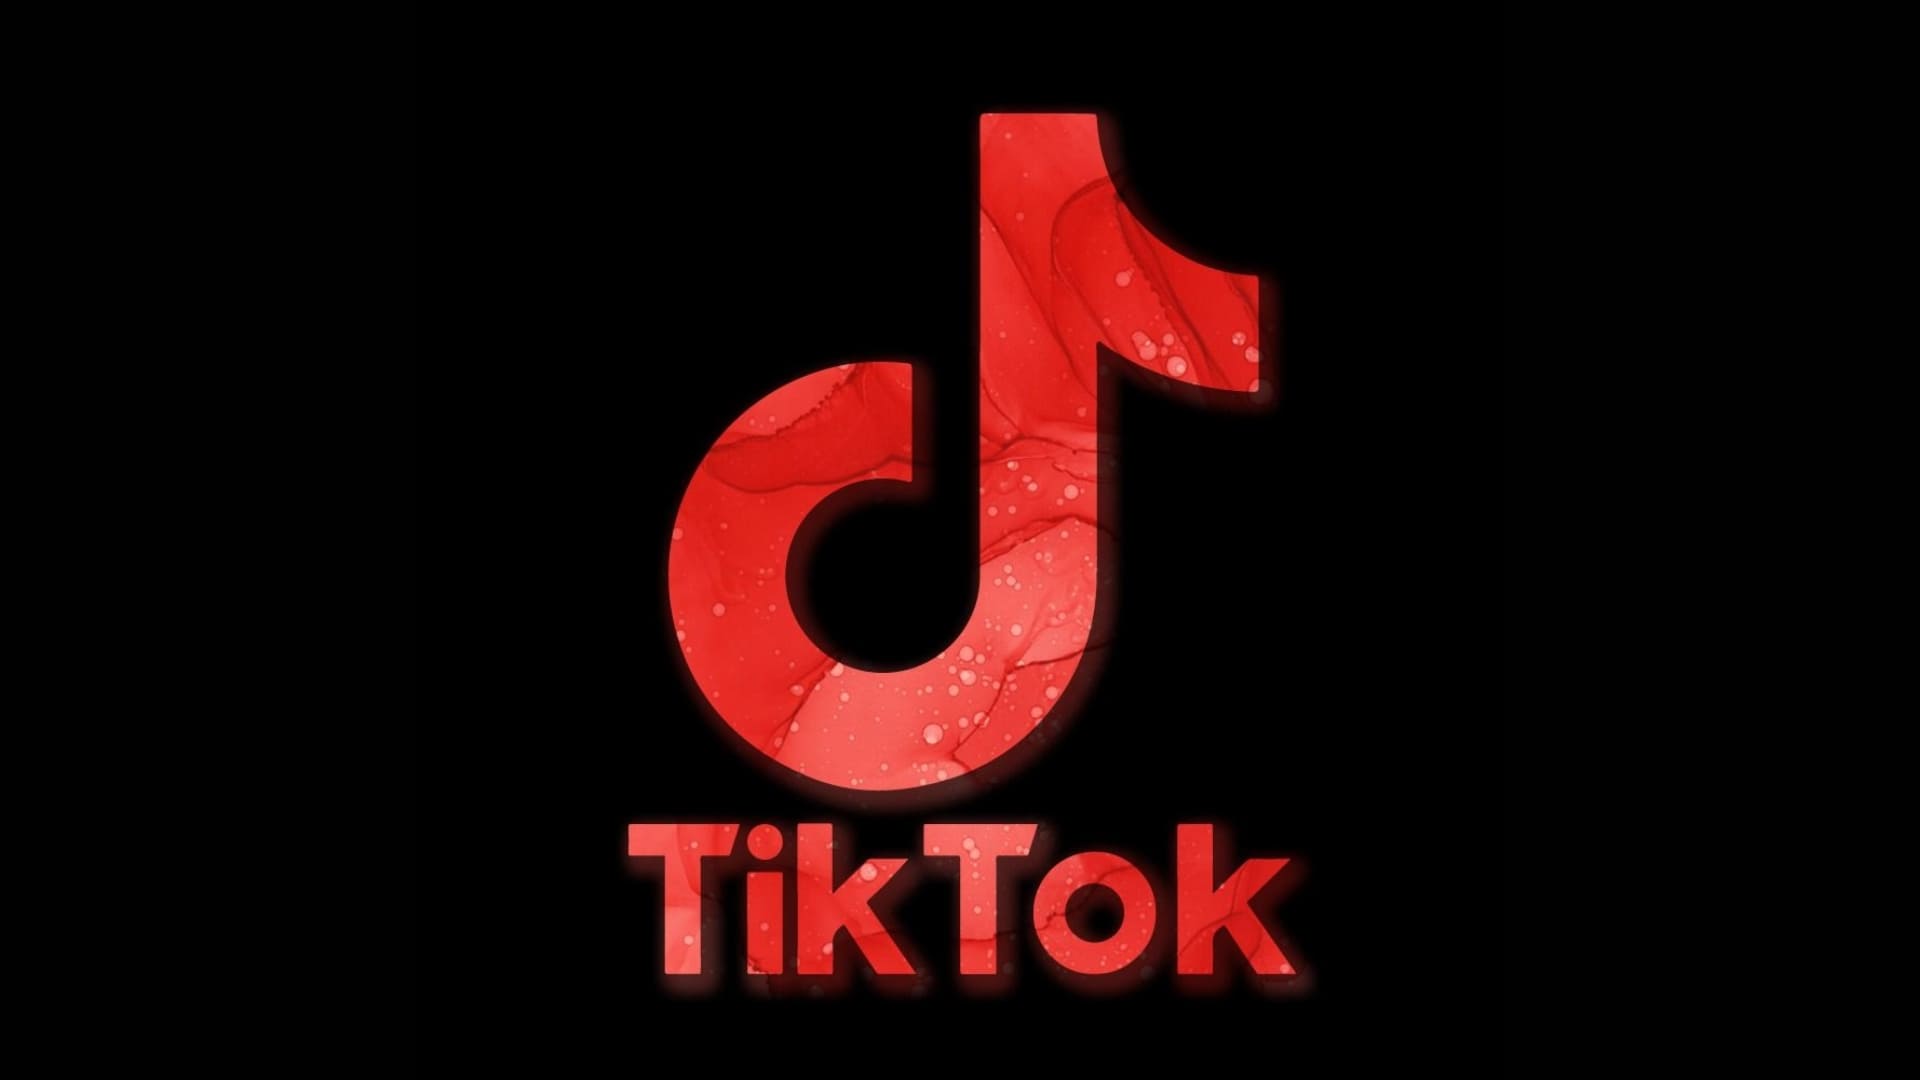 Tiktok Wallpapers On Wallpaperdog Download and use 10,000+ aesthetic wallpaper stock photos for free. tiktok wallpapers on wallpaperdog